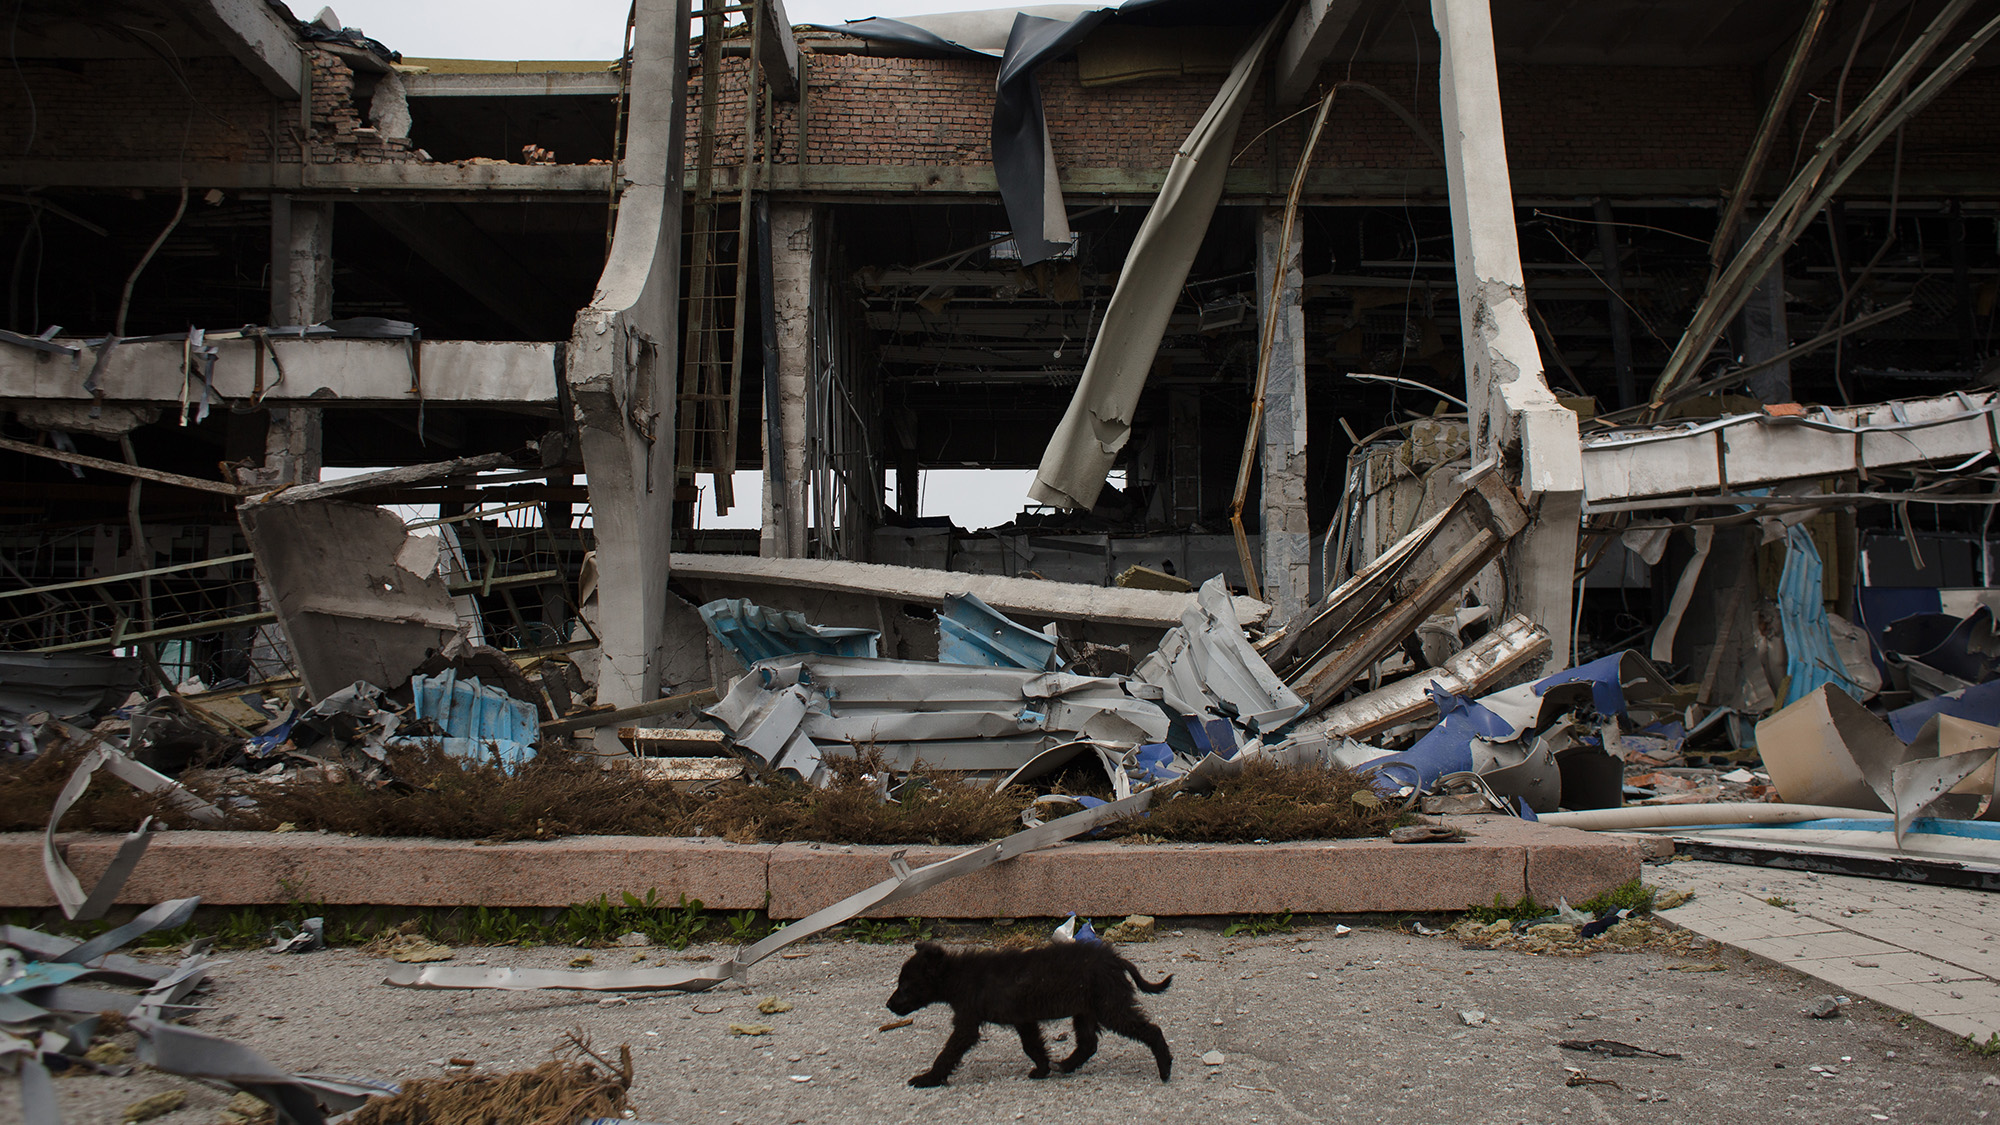 A stray dog walks in the rubble of a destroyed terminal at the airport in Mykolaiv, Ukraine on April 22. 